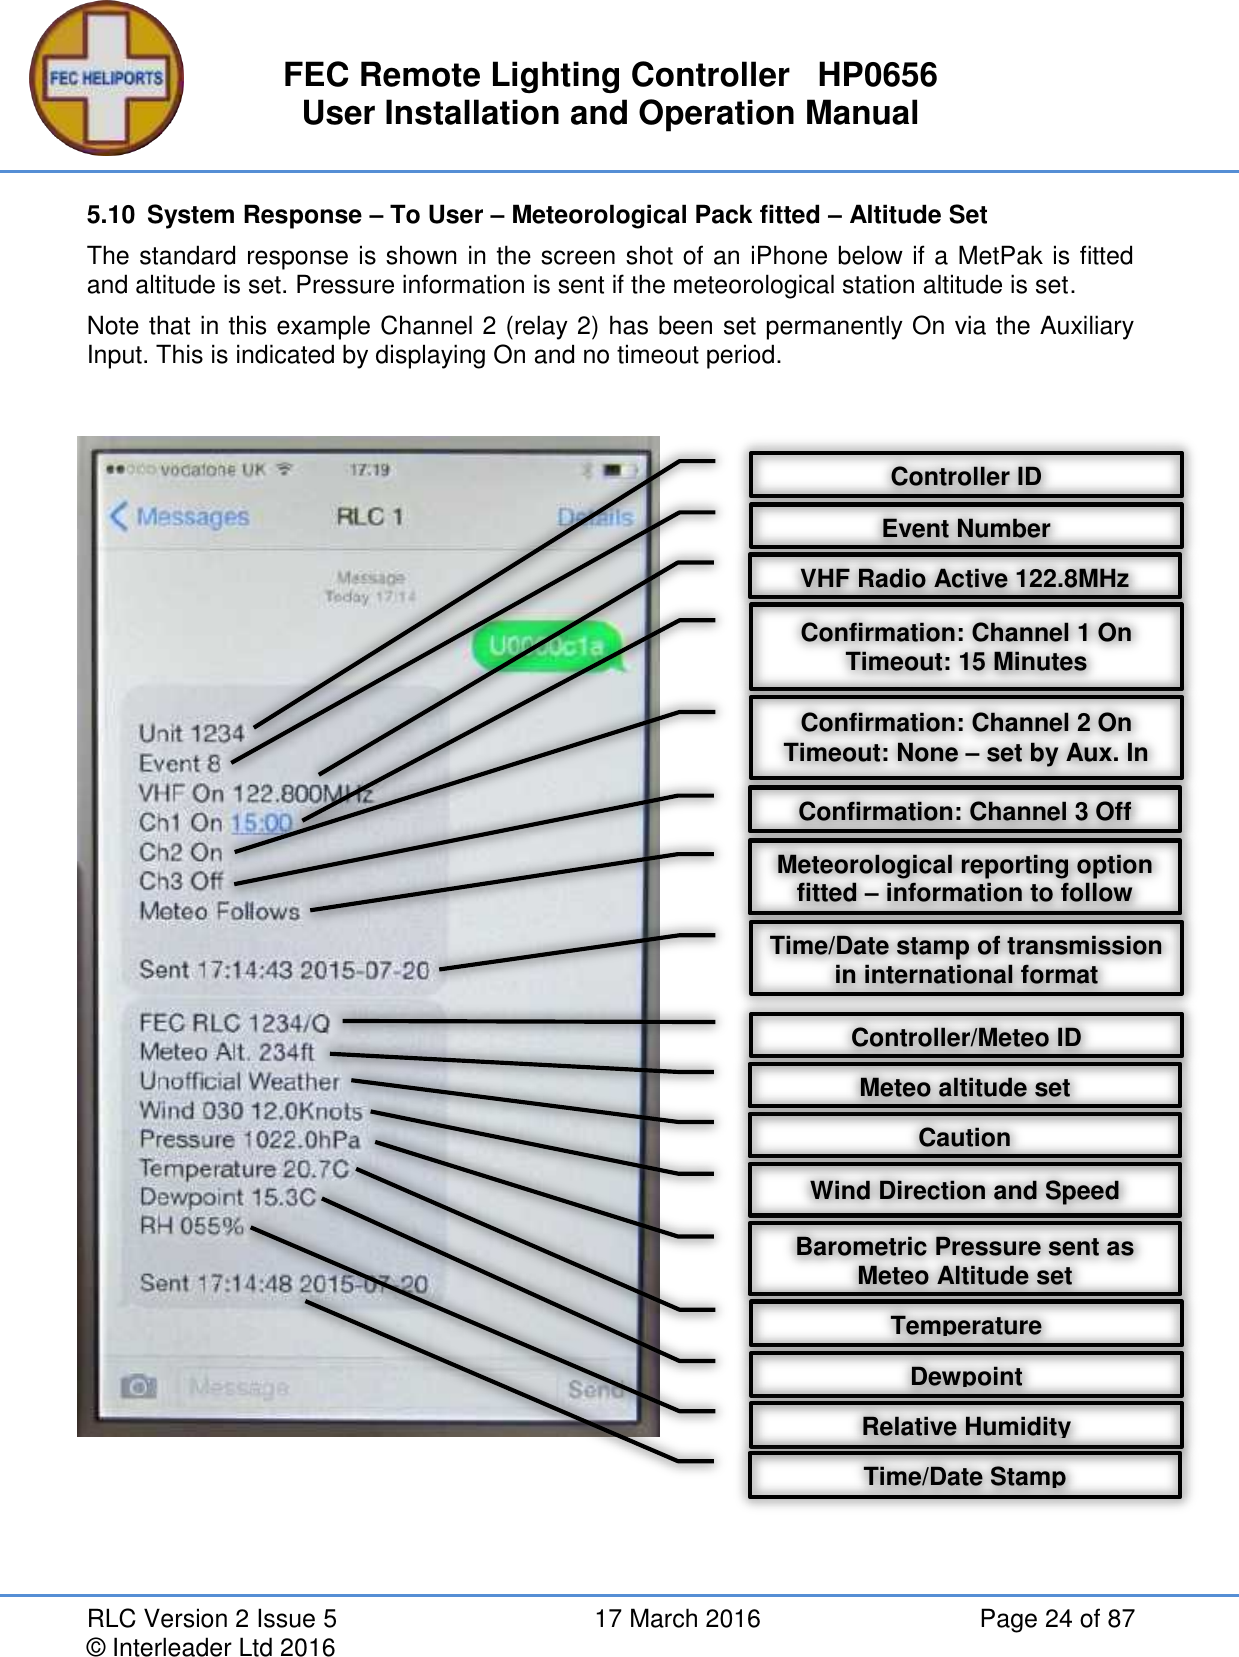 FEC Remote Lighting Controller   HP0656 User Installation and Operation Manual RLC Version 2 Issue 5  17 March 2016  Page 24 of 87 © Interleader Ltd 2016 5.10  System Response – To User – Meteorological Pack fitted – Altitude Set  The standard response is shown in the screen shot of an iPhone below if a MetPak is fitted and altitude is set. Pressure information is sent if the meteorological station altitude is set. Note that in this example Channel 2 (relay 2) has been set permanently On via the Auxiliary Input. This is indicated by displaying On and no timeout period.      Controller ID VHF Radio Active 122.8MHz Confirmation: Channel 1 On Timeout: 15 Minutes Confirmation: Channel 2 On Timeout: None – set by Aux. In Meteorological reporting option fitted – information to follow Time/Date stamp of transmission in international format Confirmation: Channel 3 Off Controller/Meteo ID Caution Wind Direction and Speed Barometric Pressure sent as Meteo Altitude set Temperature Dewpoint Relative Humidity Time/Date Stamp Event Number Meteo altitude set 